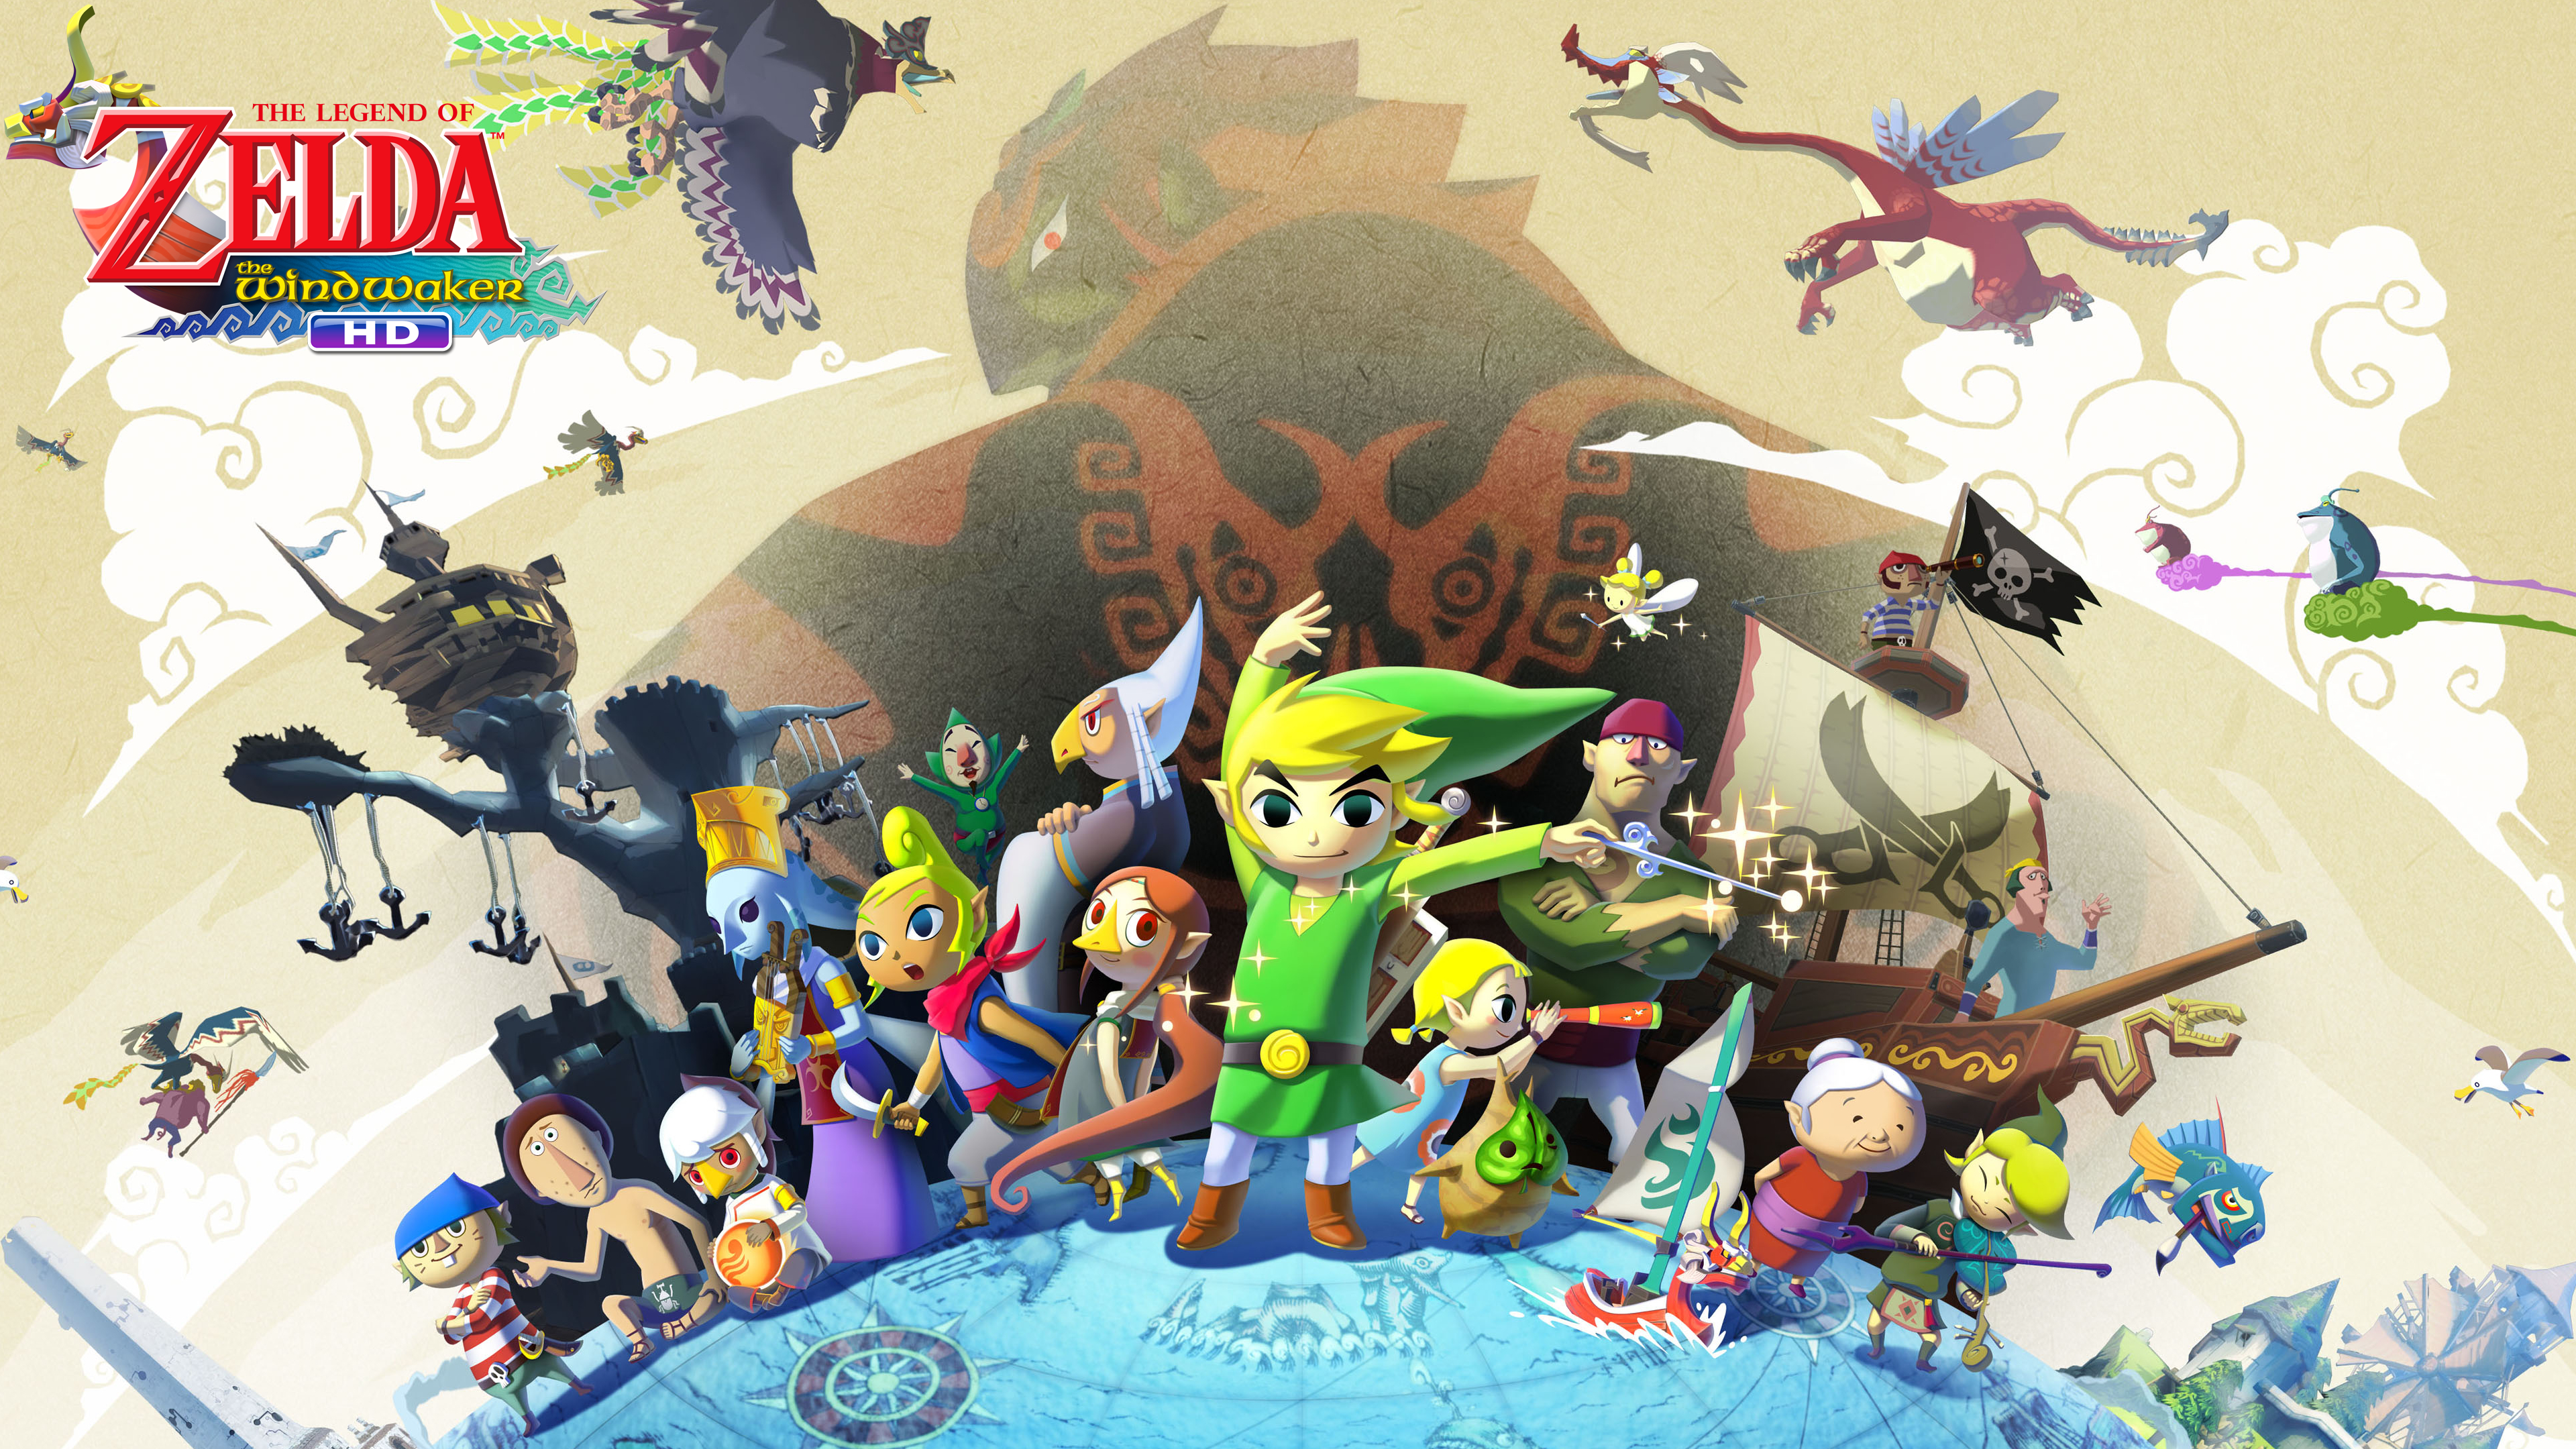 3840x2160 The Legend of Zelda: The Wind Waker HD Wallpapers and Backgrounds